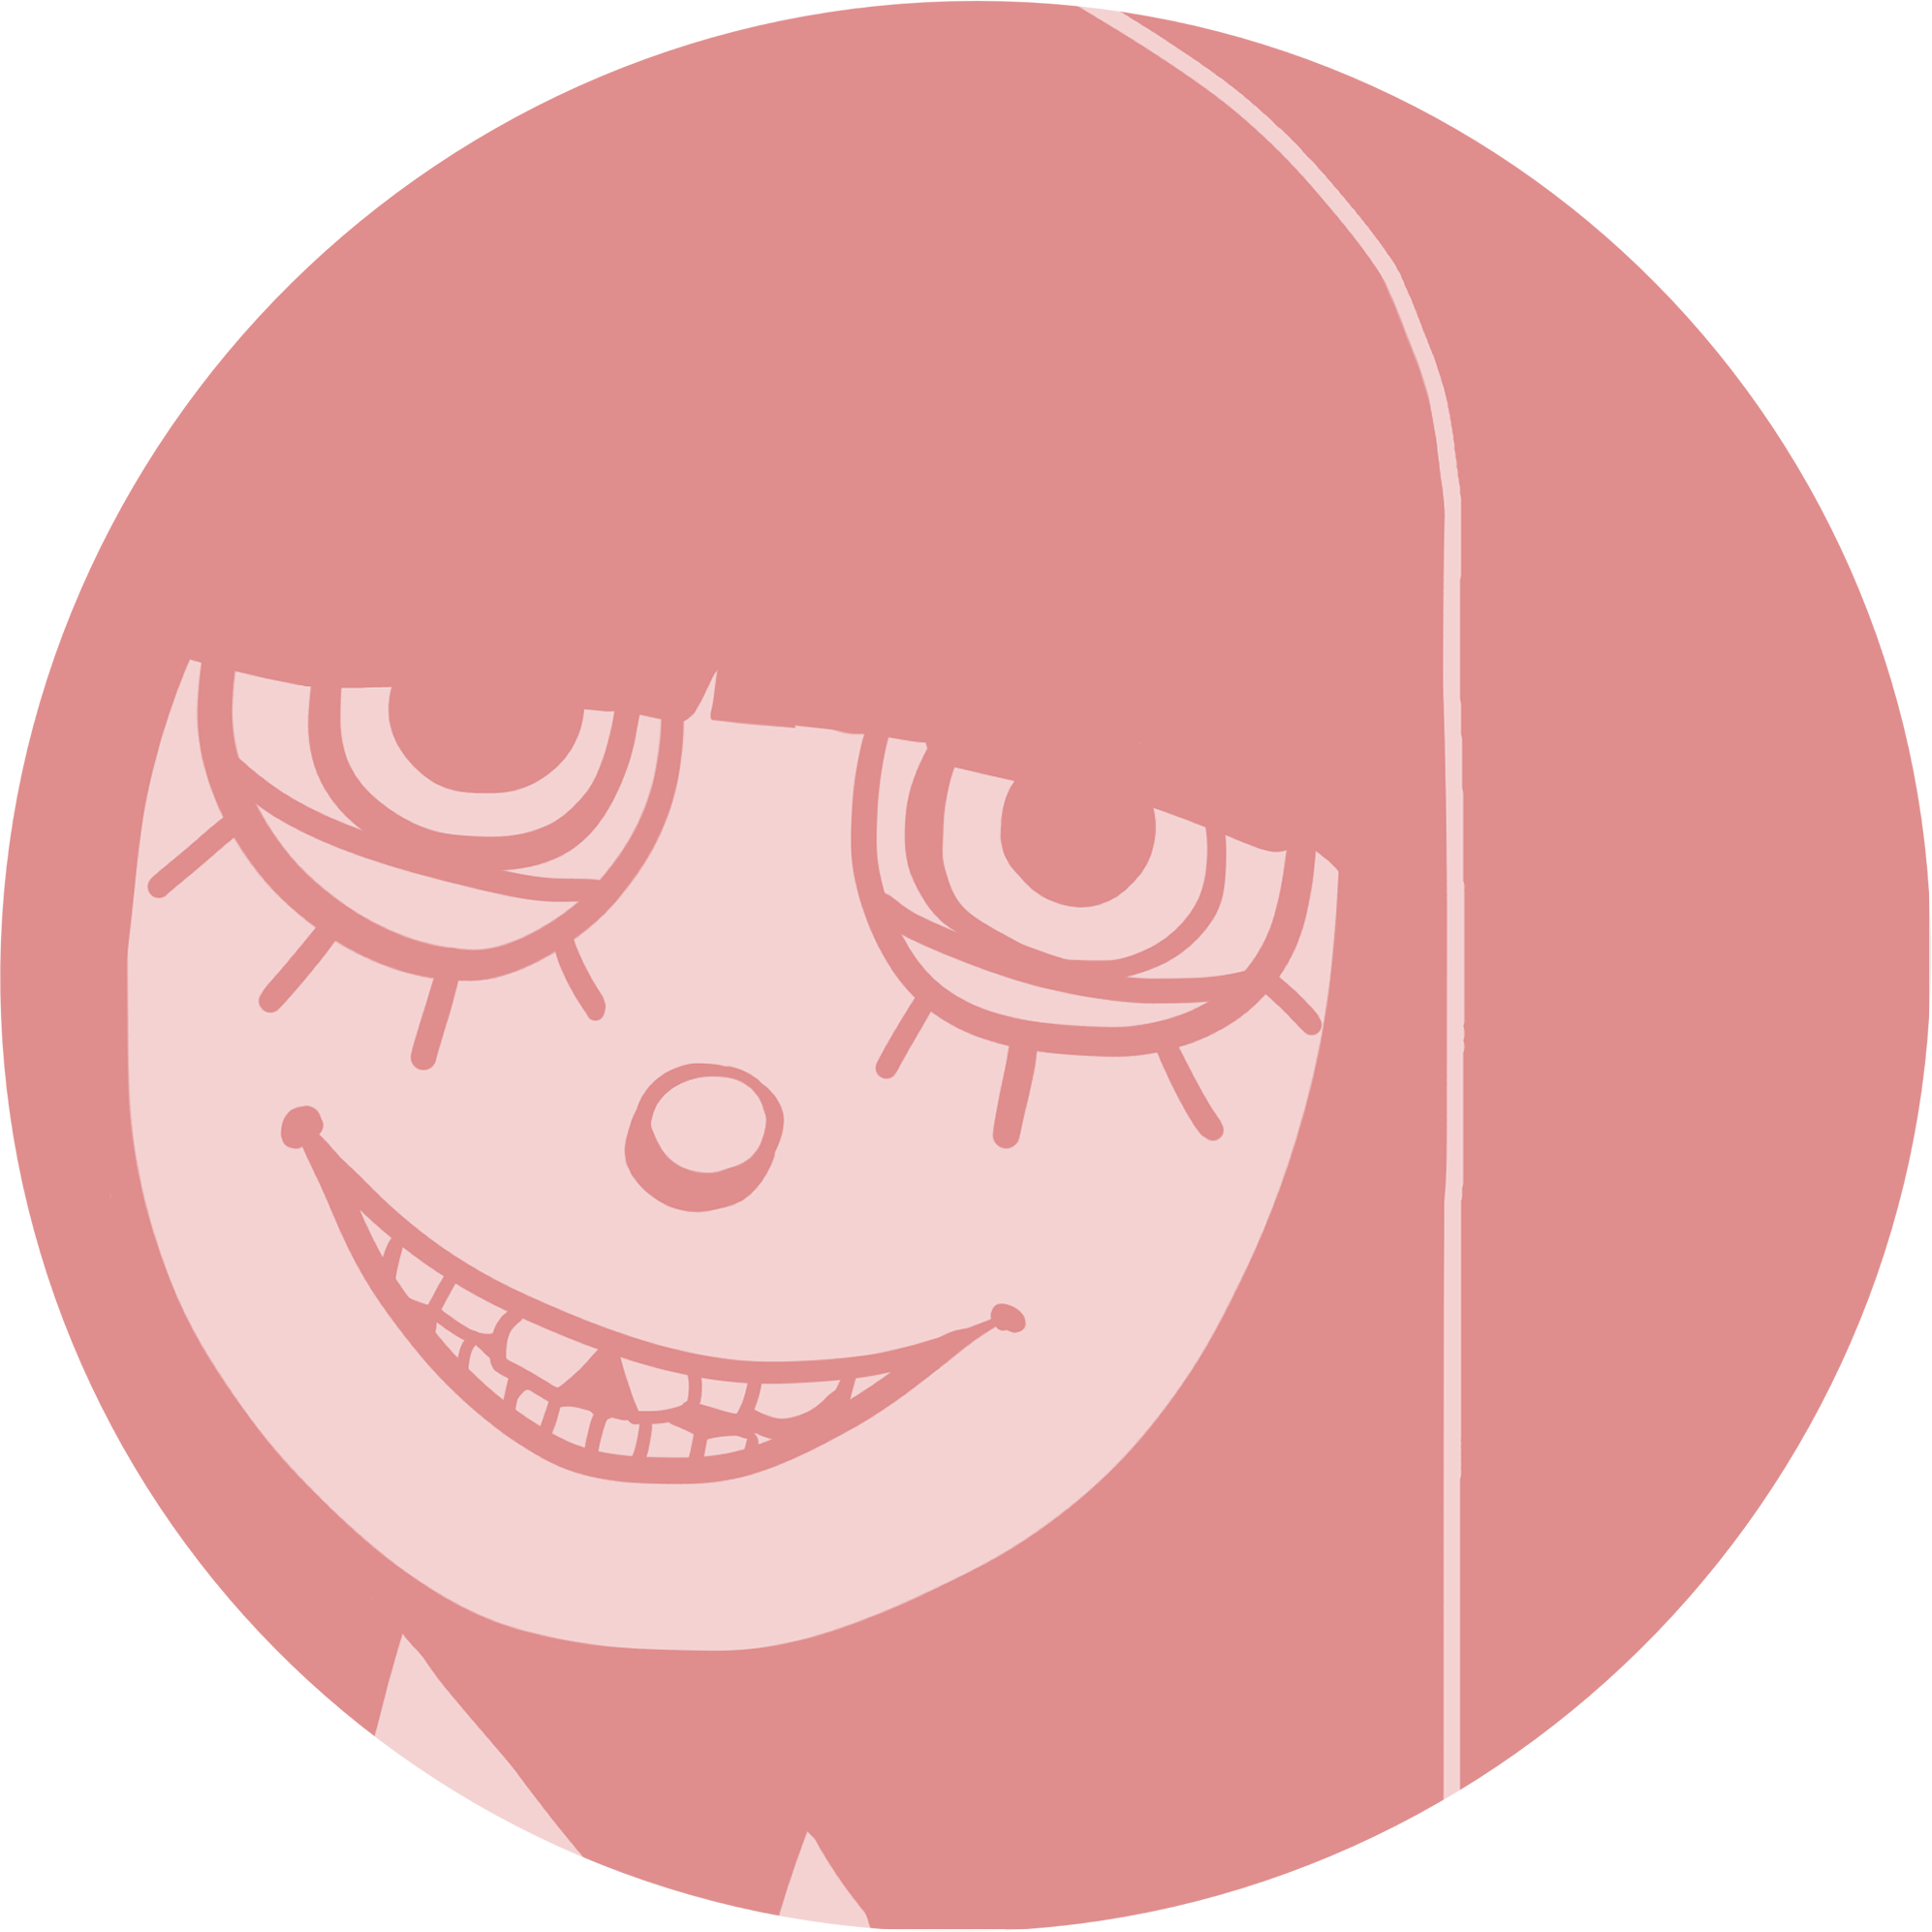 Image of Bianca. She has long hair with bangs covering half her red eyes. Her front teeth are crooked, making her tooth gap a triangle. She has a circular nose and lashes that go only on the bottom of her eyes.